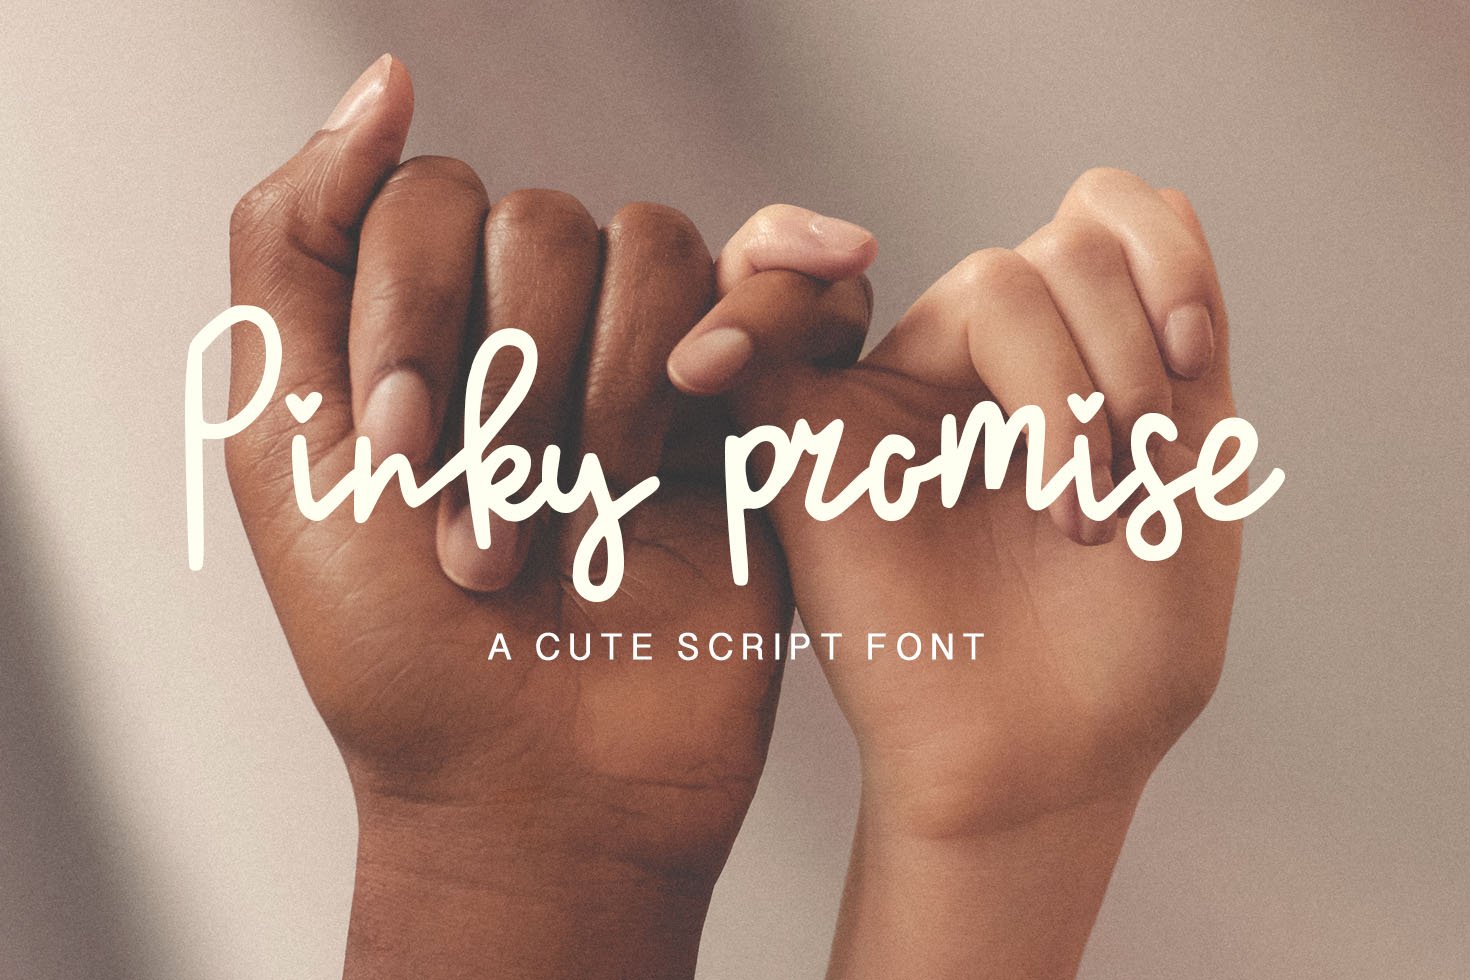 Pinky Promise - A Cute Script Font cover image.